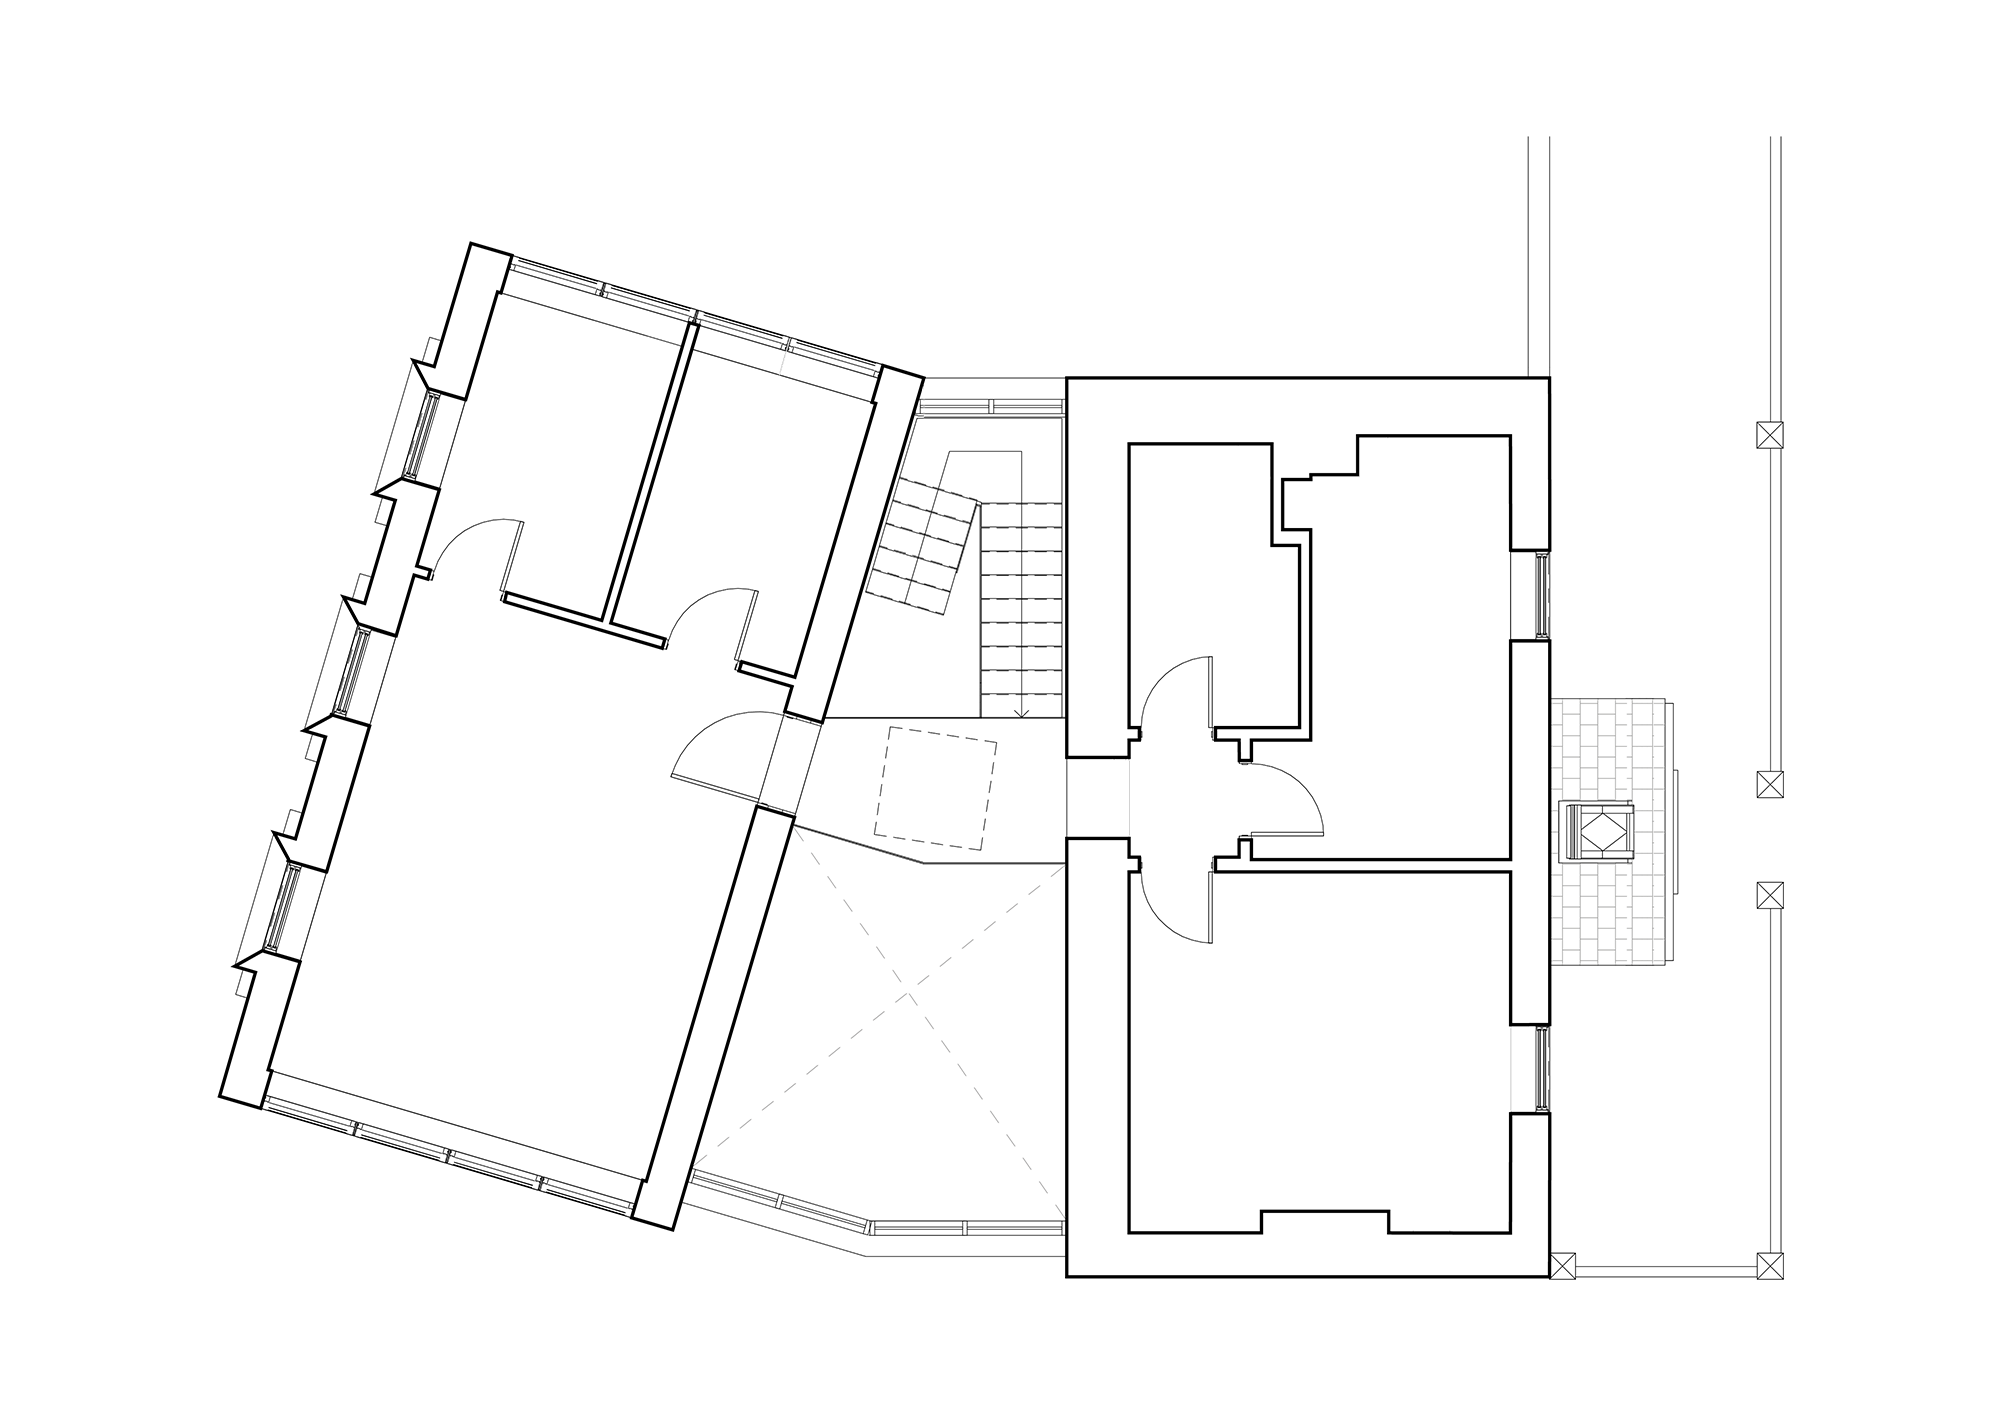 FIRST FLOOR PLAN PROPOSED - TWIN HOUSE - BROOMFLEET ARCHITECTS - SAMUEL KENDALL ASSOCIATES